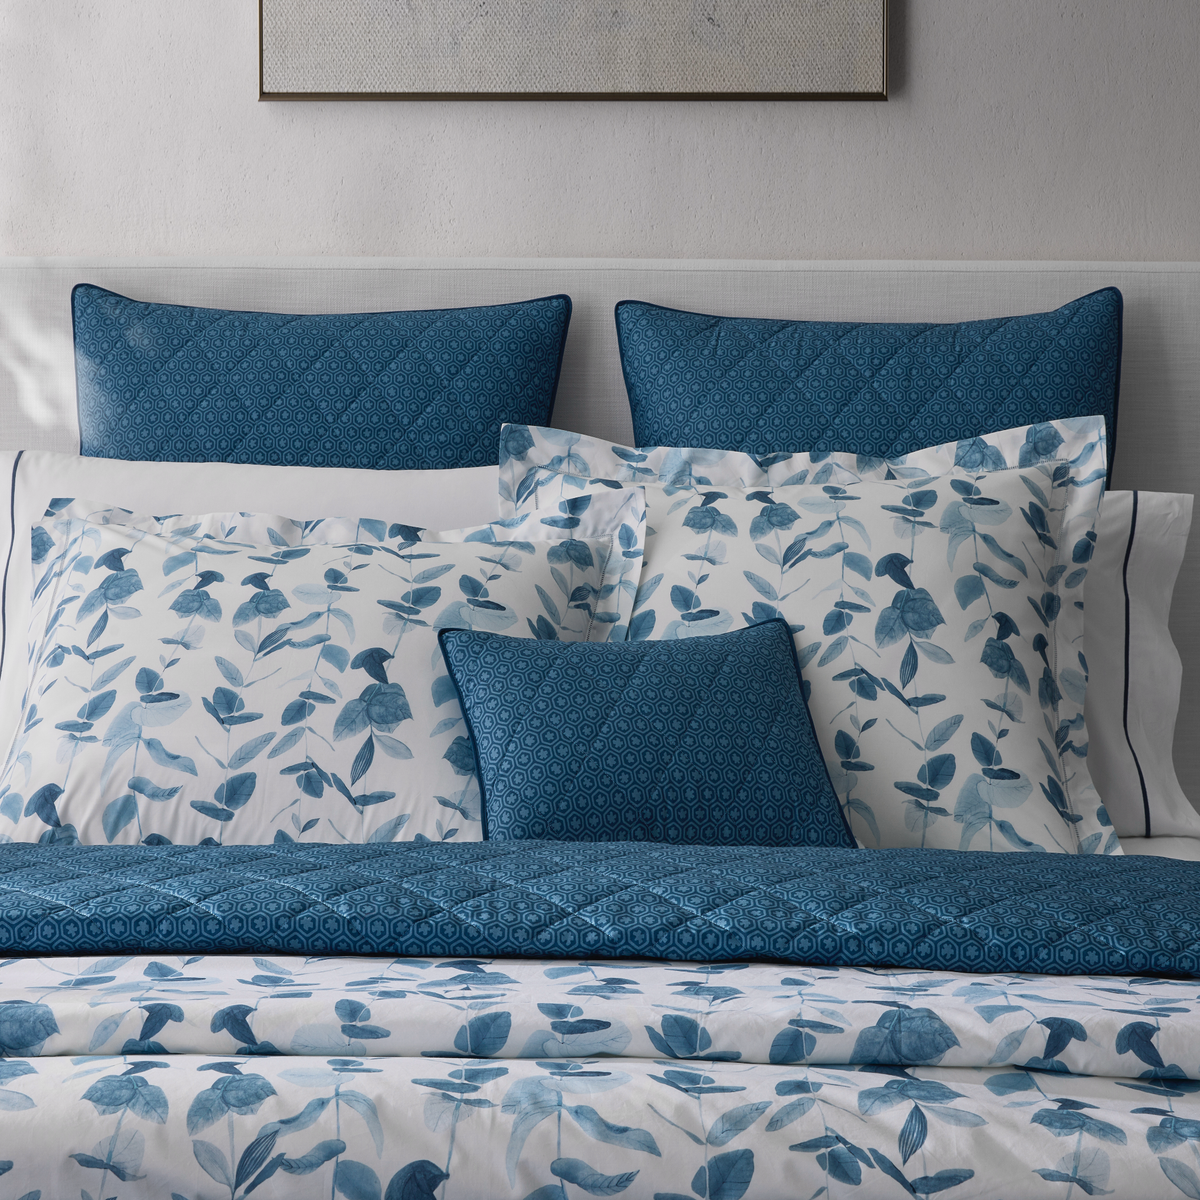 Prussian Blue Matouk Schumacher Levi Bedding Coordinated with Antonia Collection